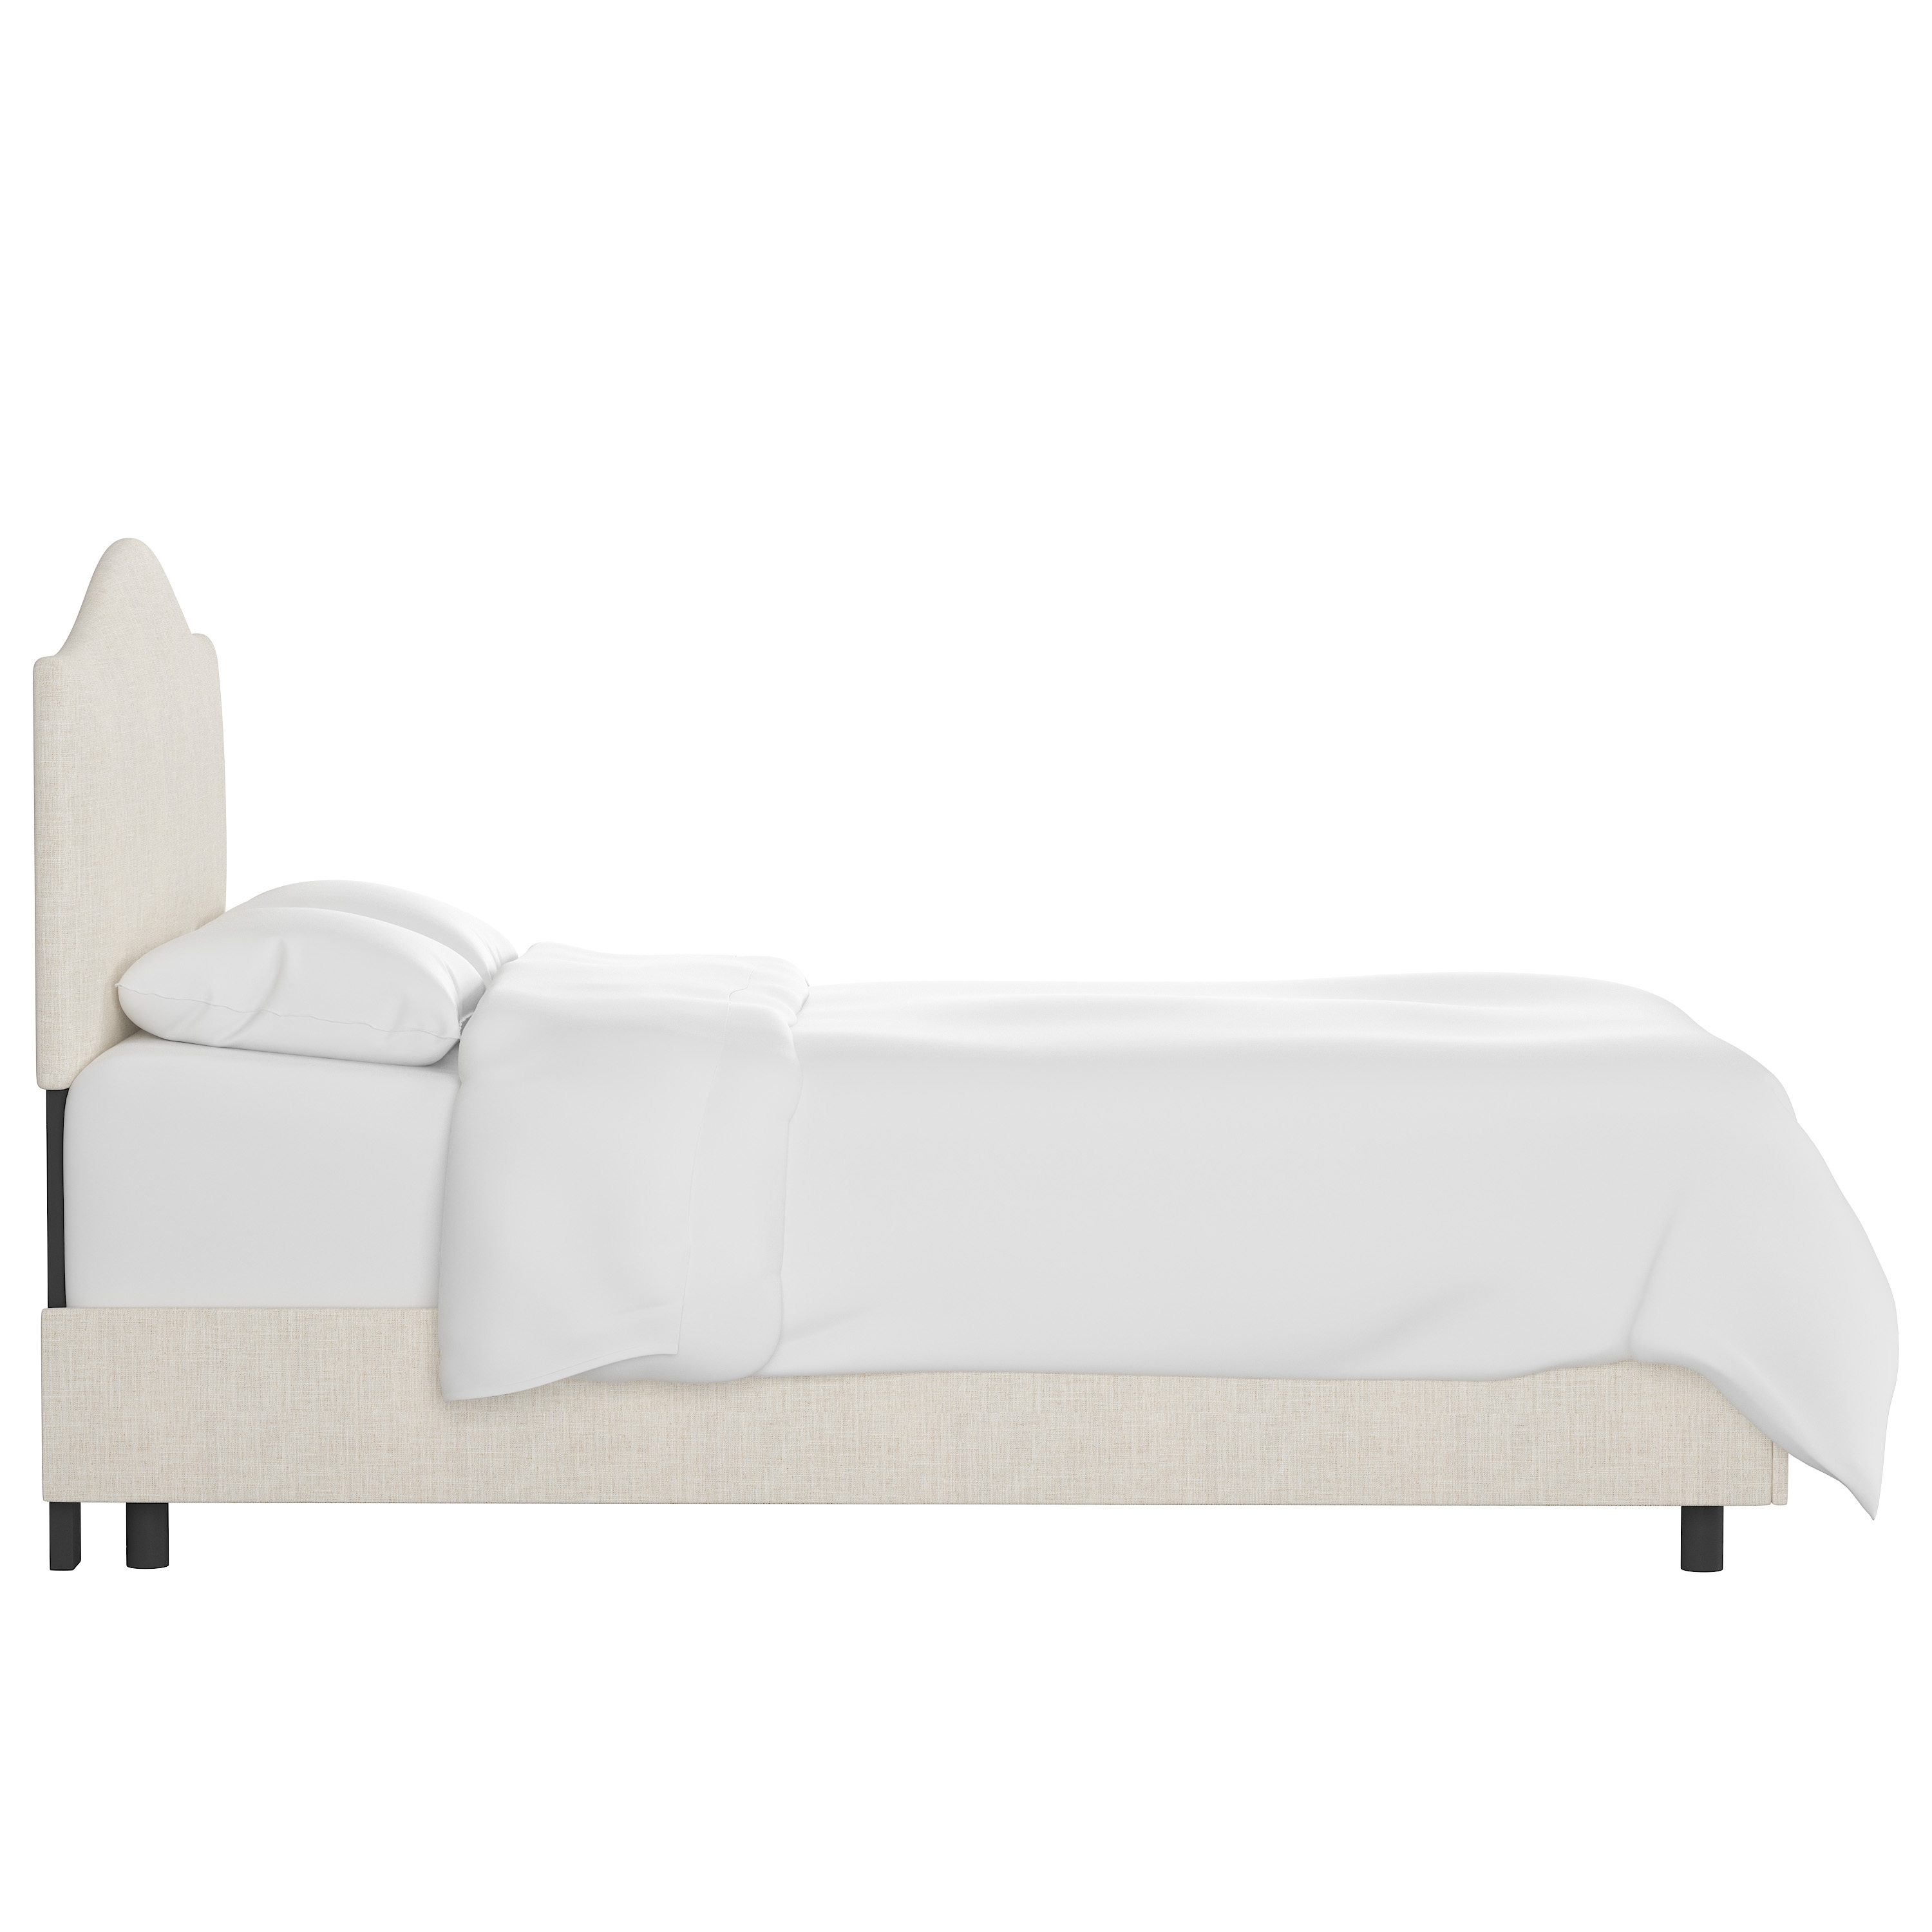 California King Kenmore Bed in Linen Talc - Image 2